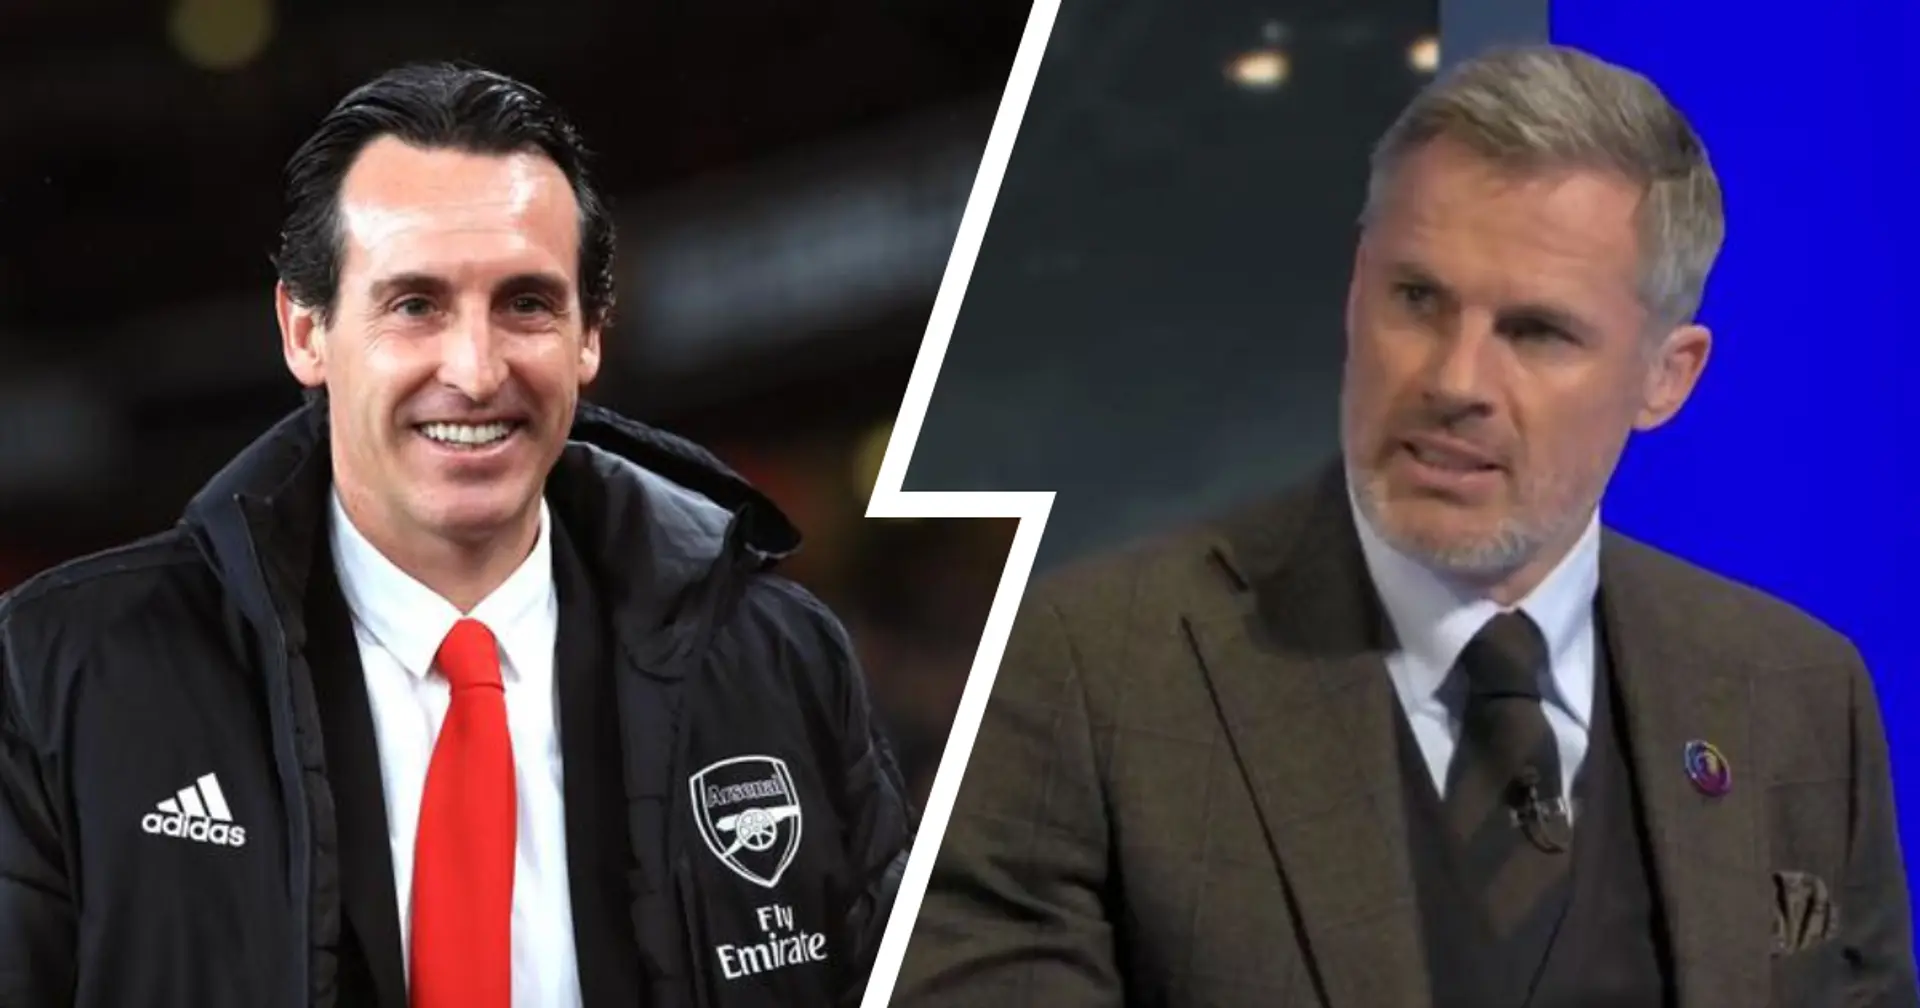 'It didn't quite go so well for him at Arsenal': Jamie Carragher reflects on Emery's Premier League return